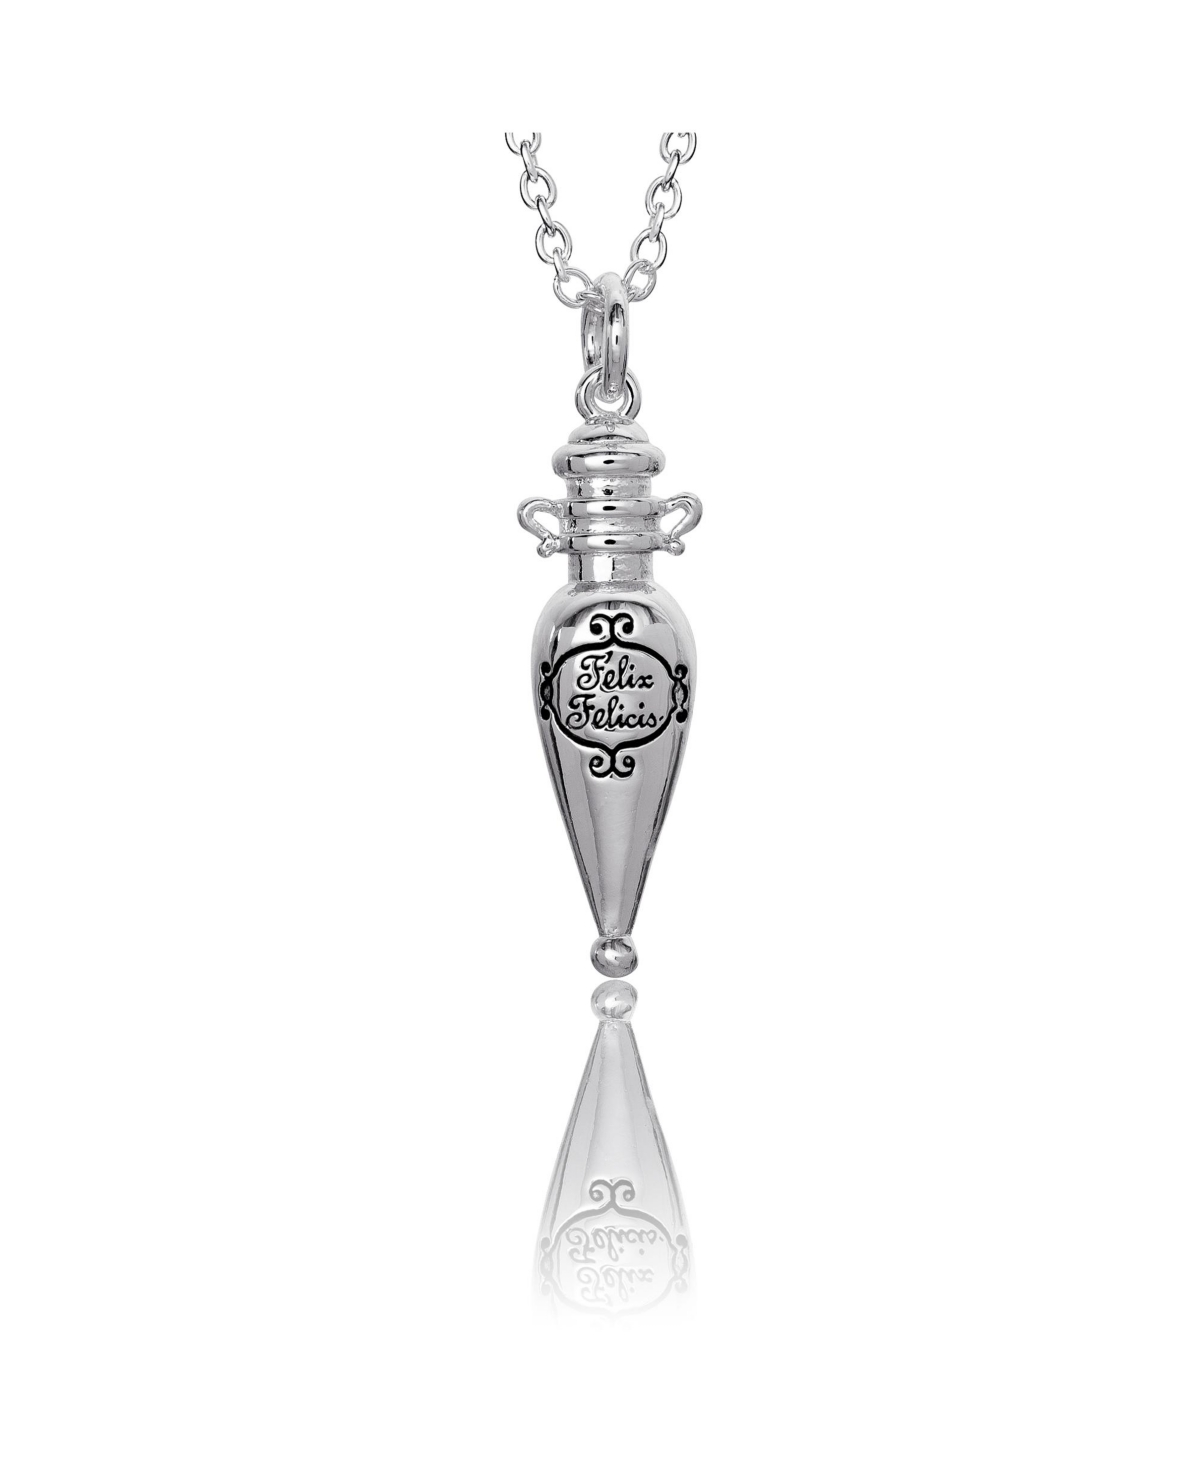 Silver Plated Felix Felicis Potion in The Bottle Pendant Necklace, 18'' - Silver tone